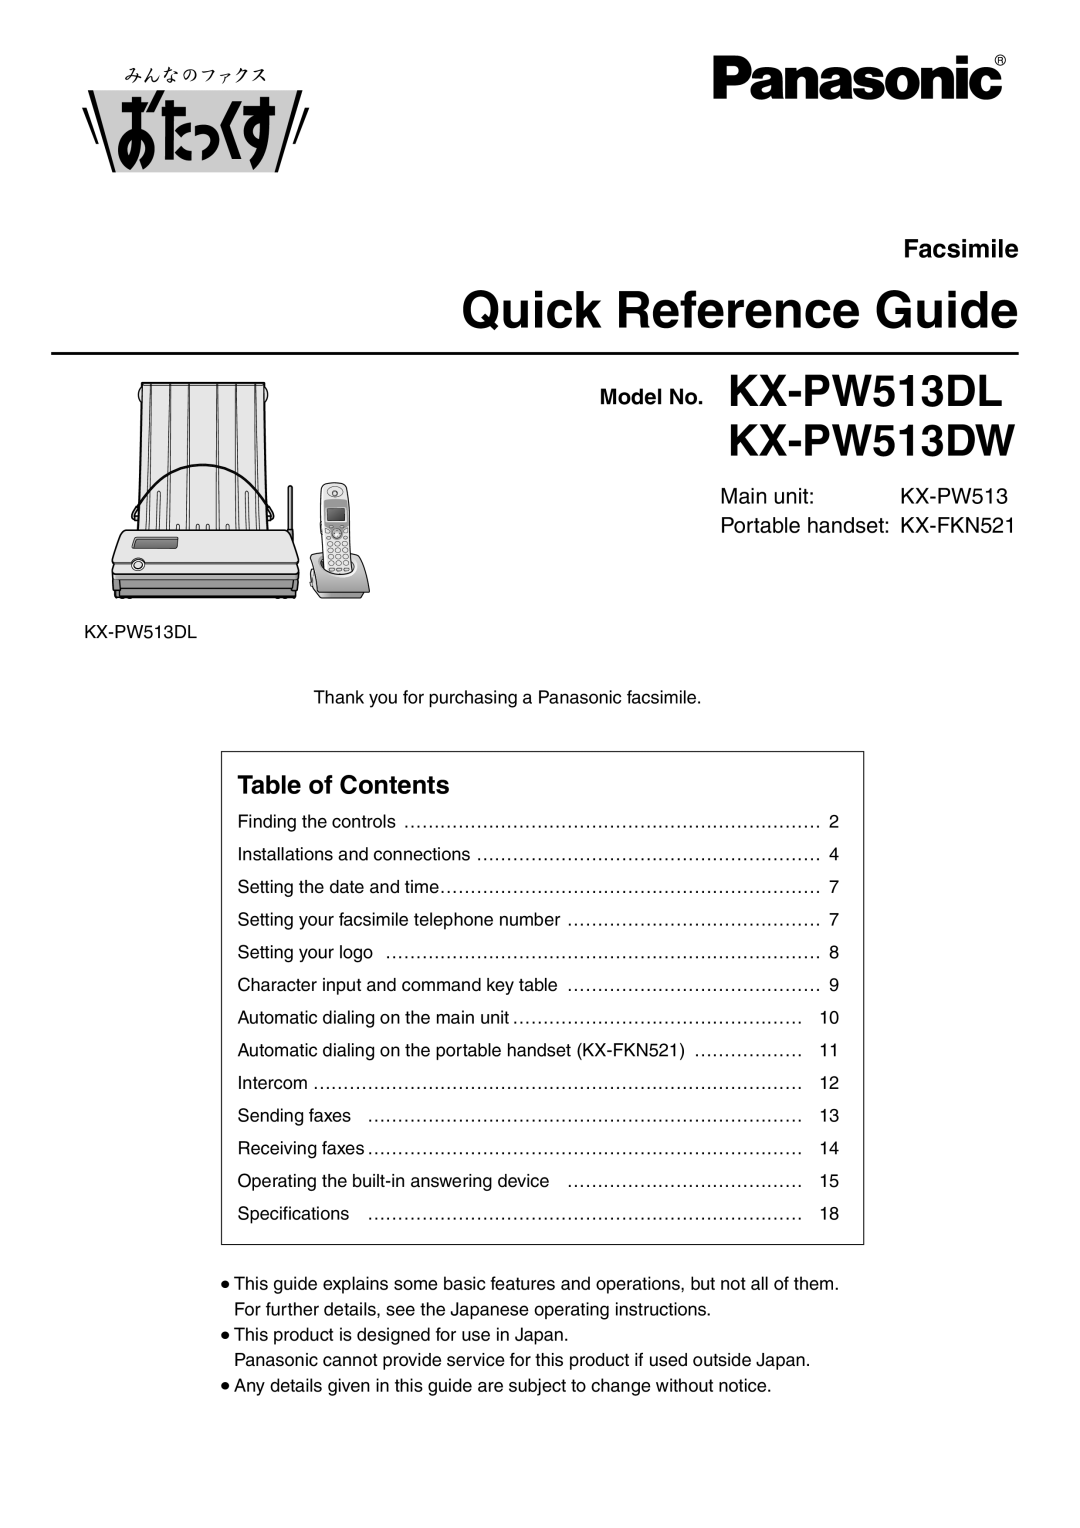 Panasonic specifications Model No. KX-PW513DL, Quick Reference Guide, KX-PW513DW, Facsimile, Table of Contents 